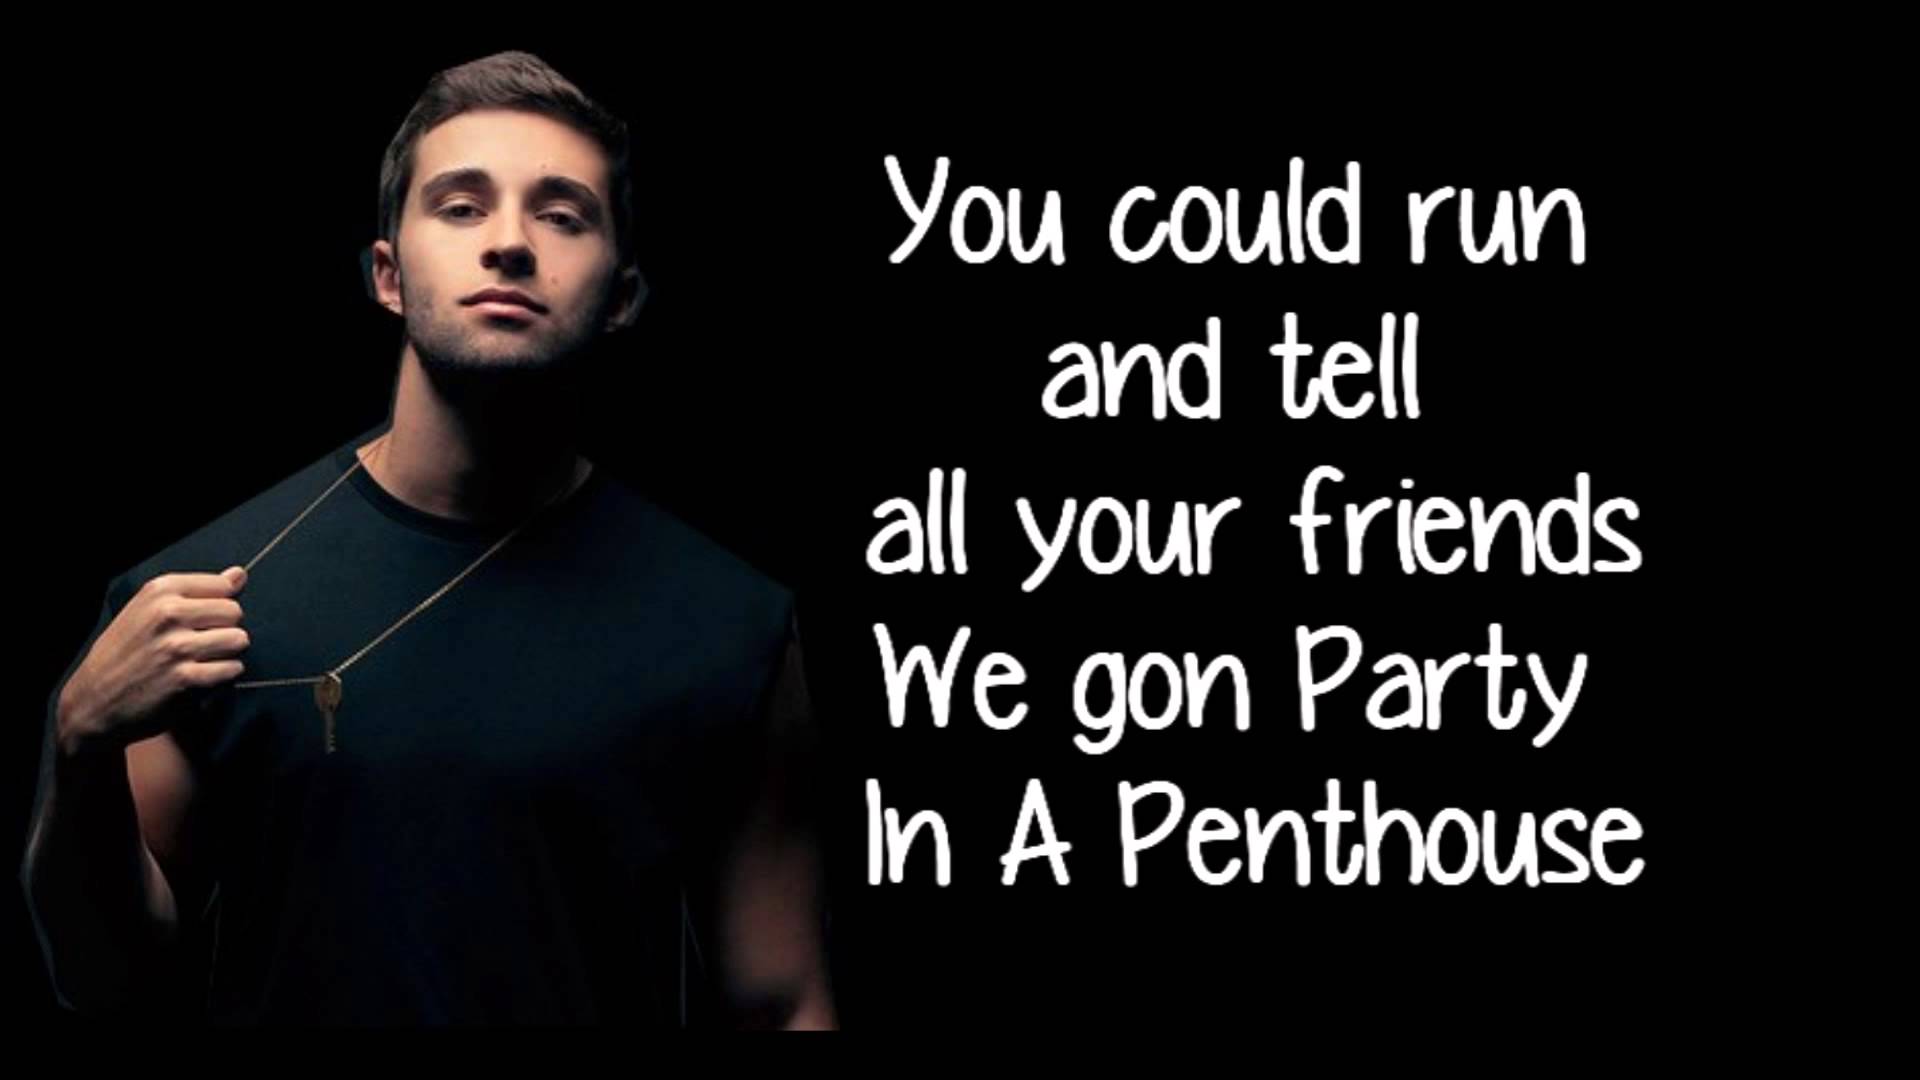 Jake Miller - Party in the penthouse